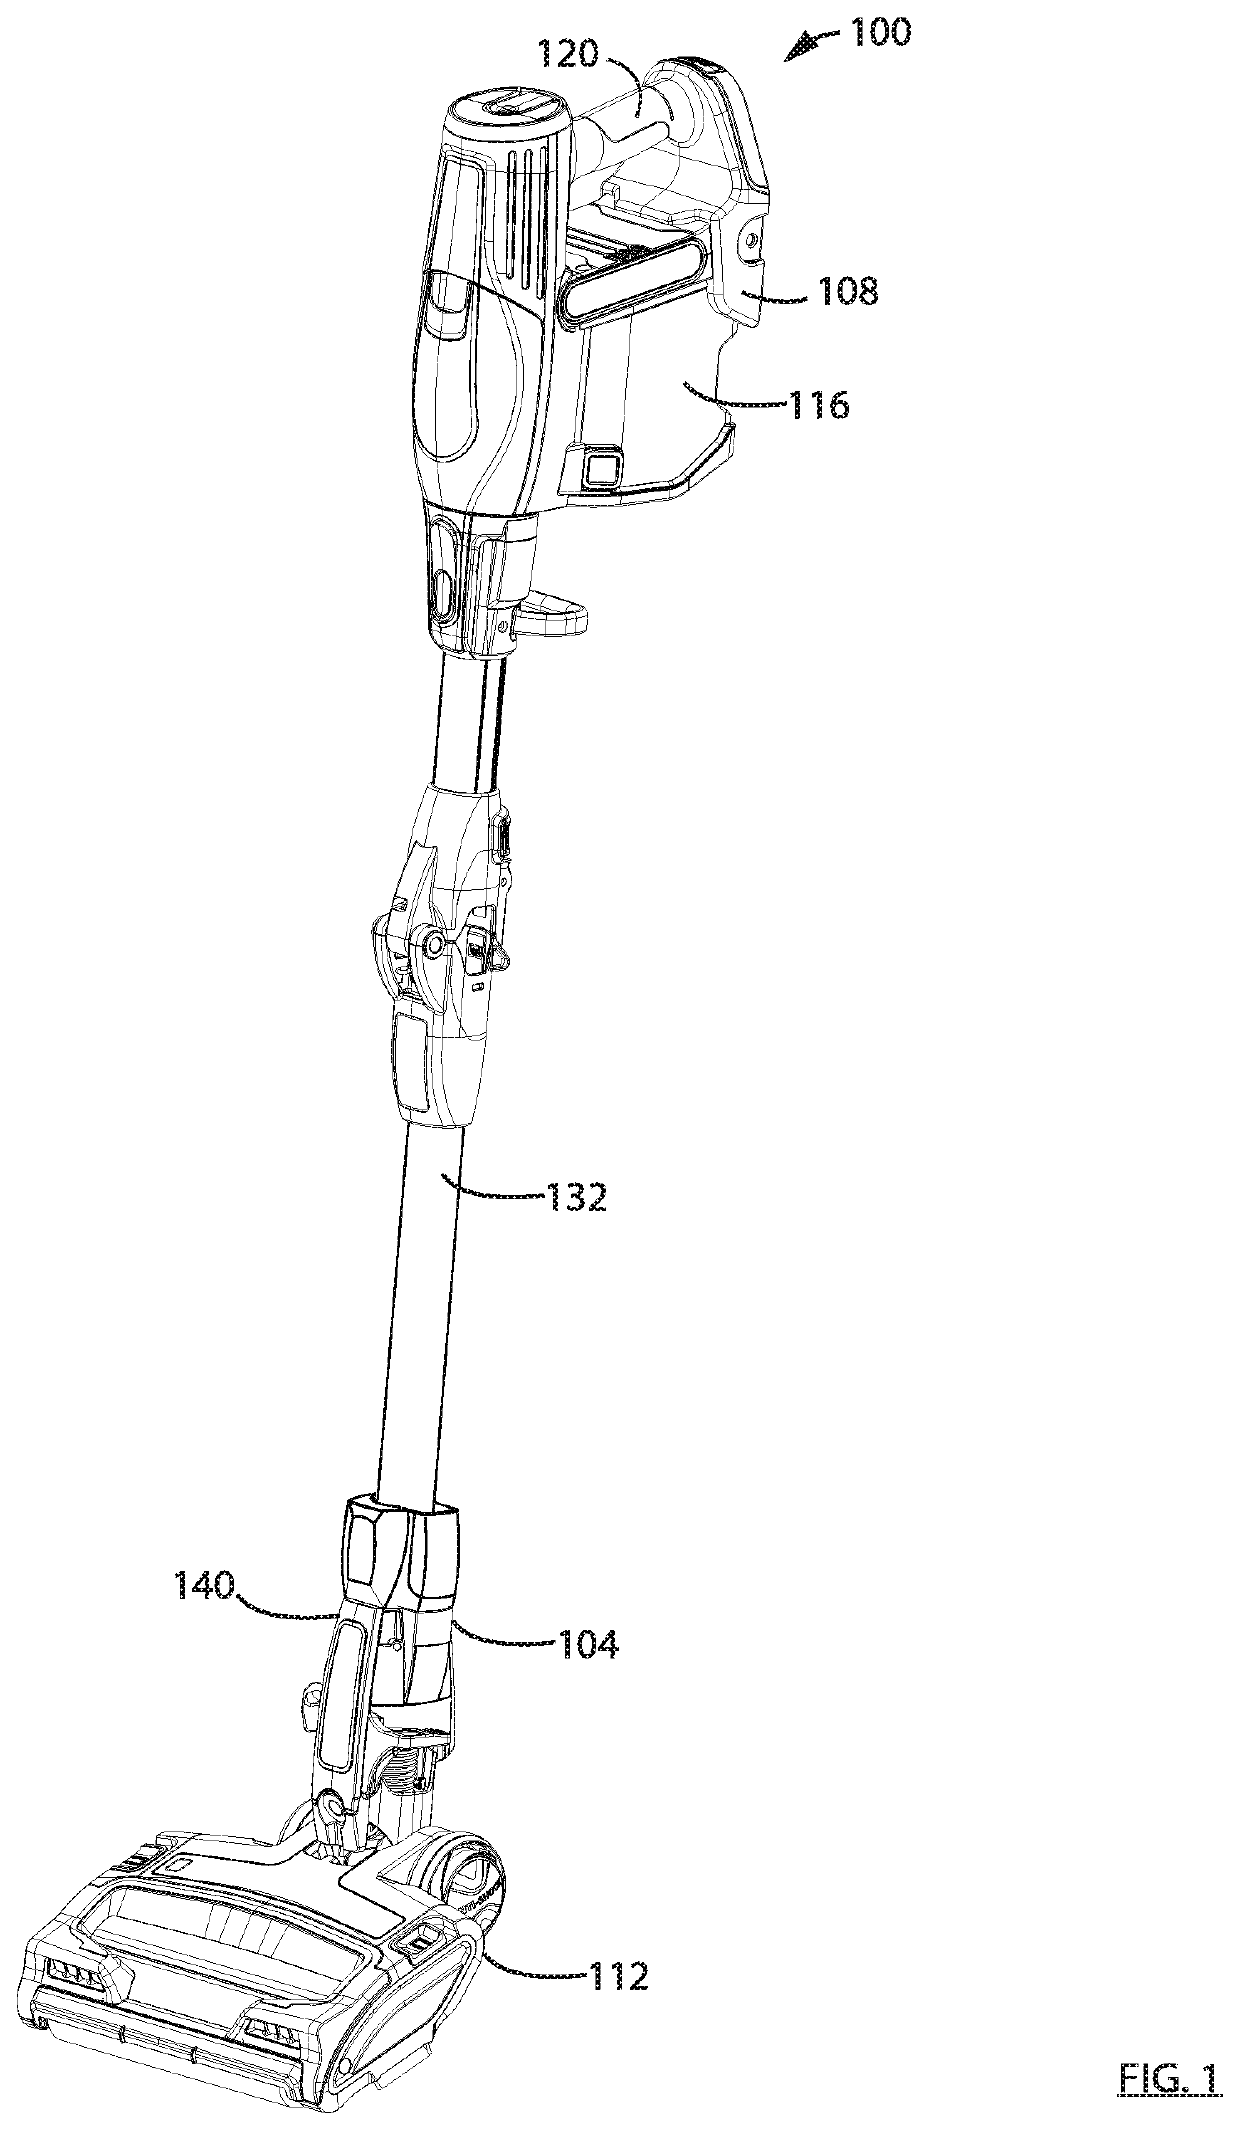 Cordless appliance, such as a surface cleaning apparatus, and a charging unit therefor